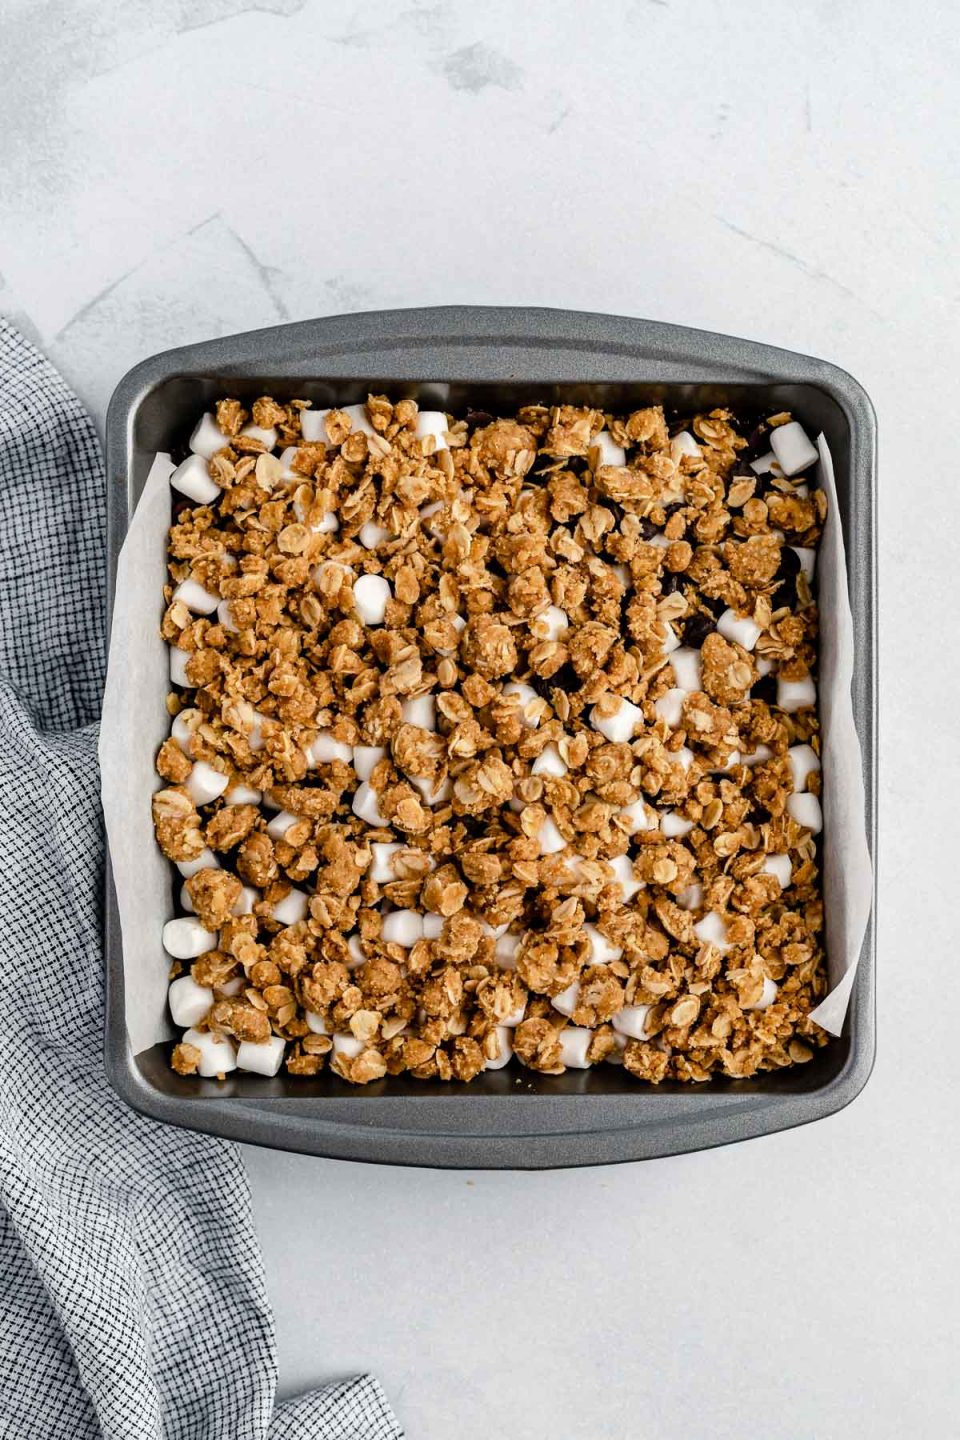 Gooey S'mores Crumble Bars prepped in a parchment-lined baking pan before being baked. The pan sits atop a white surface, with a checkered linen napkin to its side.